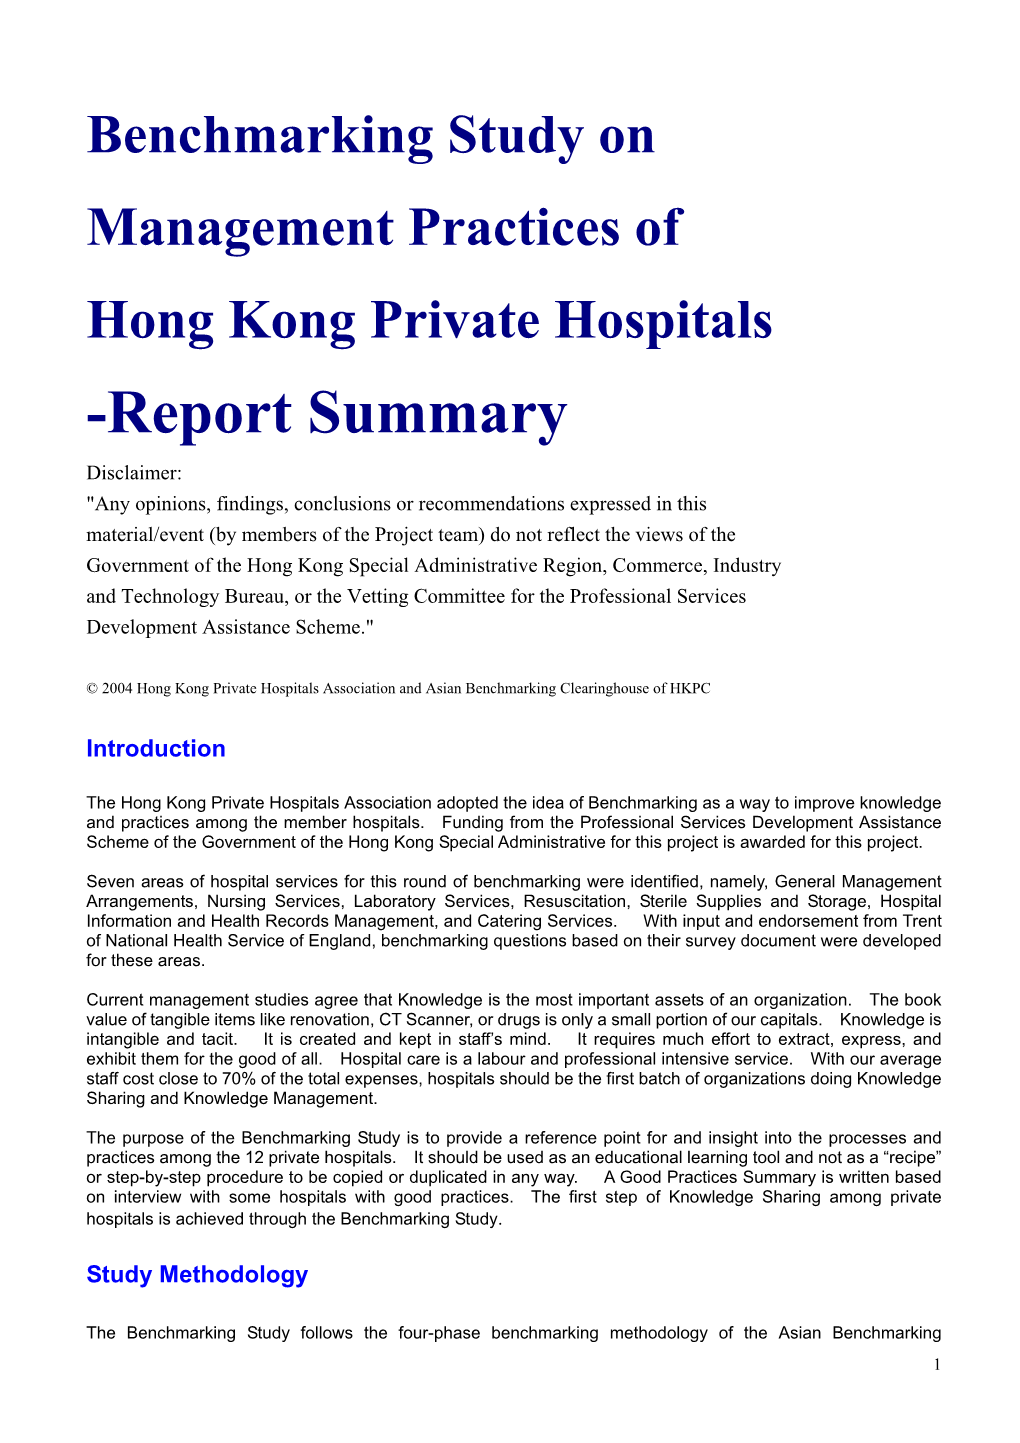 Benchmarking Study on Management Practices of Hong Kong Private